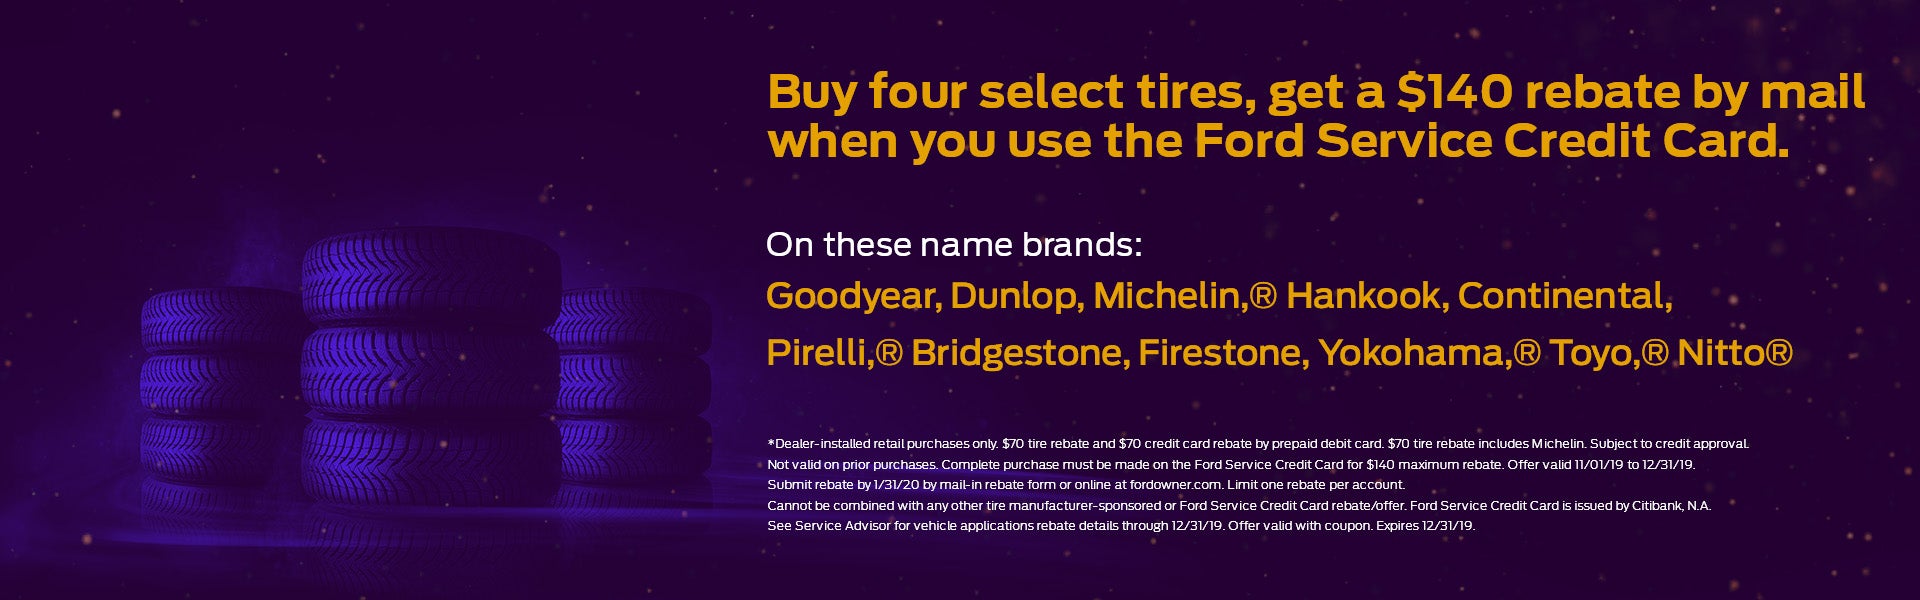 uy four select tires, get a $140 rebate by mail